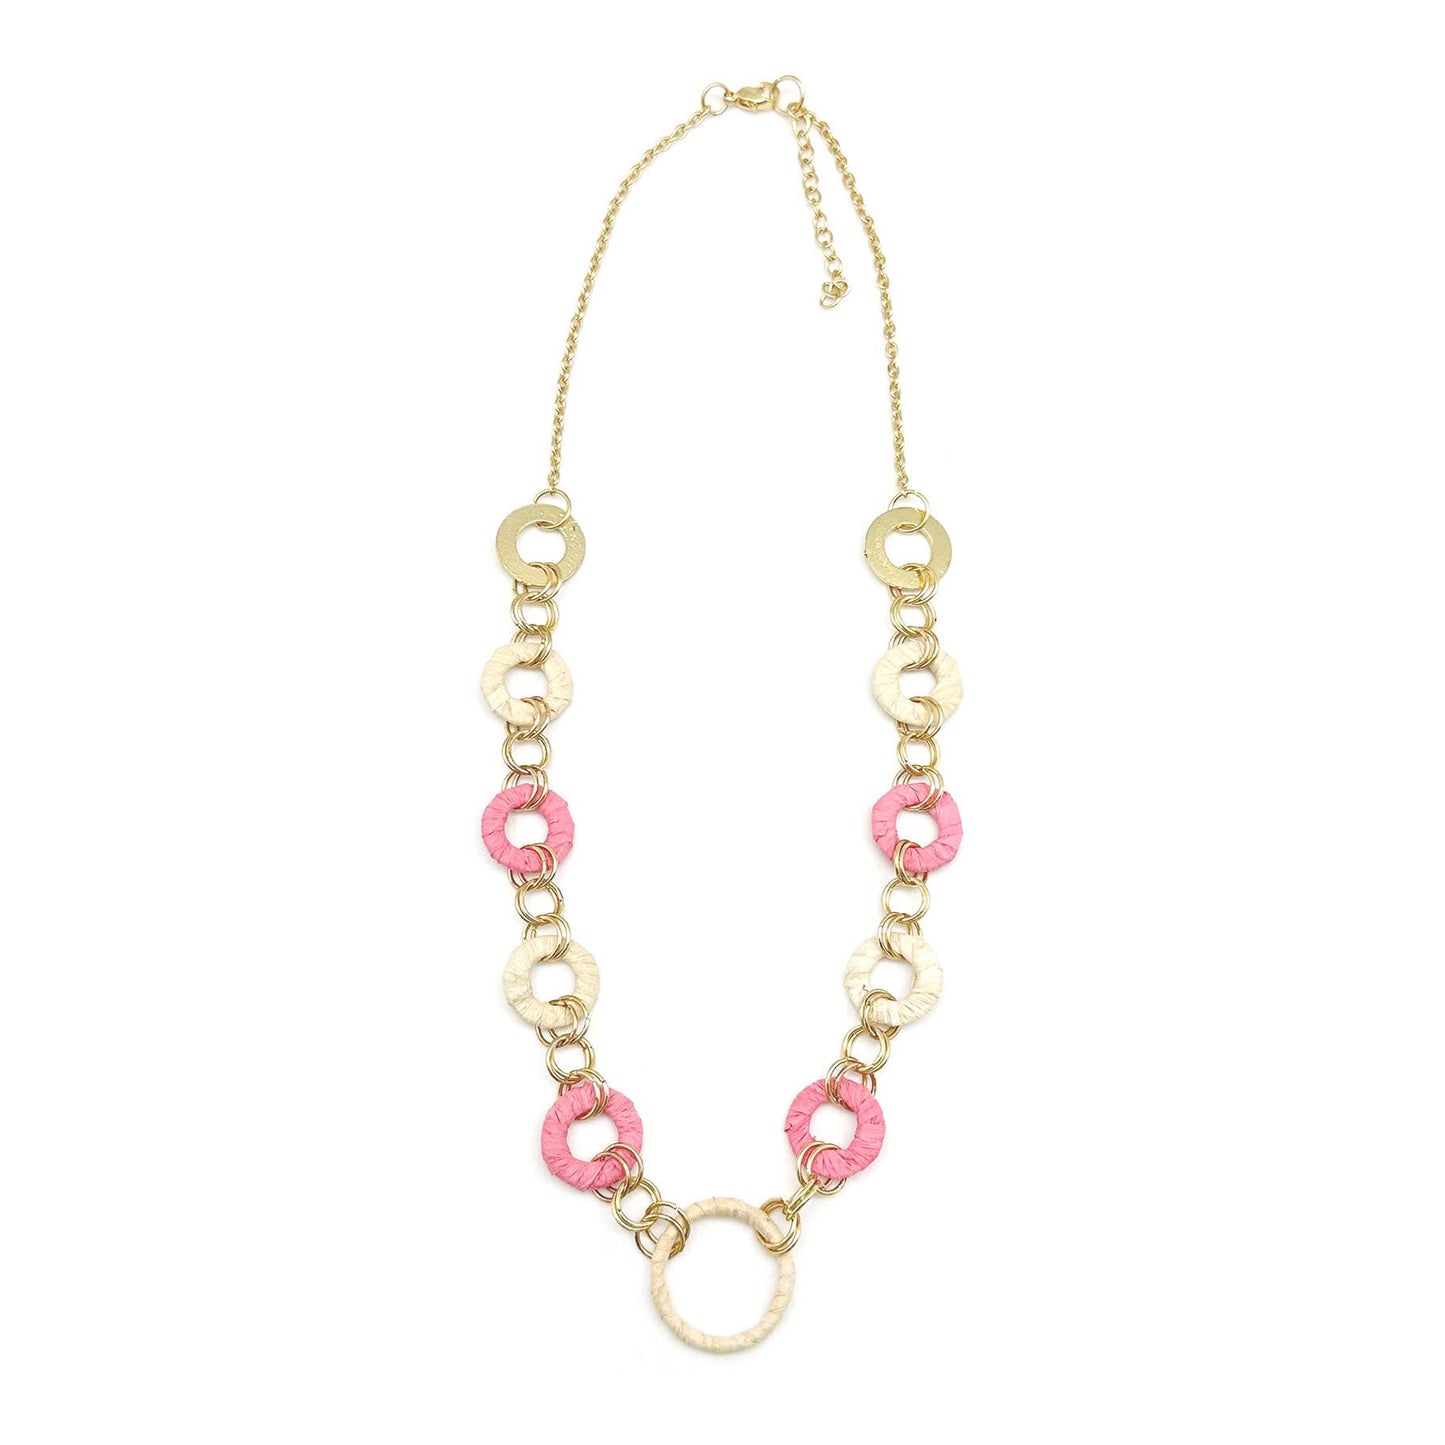 Sachi Raffia Rings Necklace - Pink and Cream Small Rings